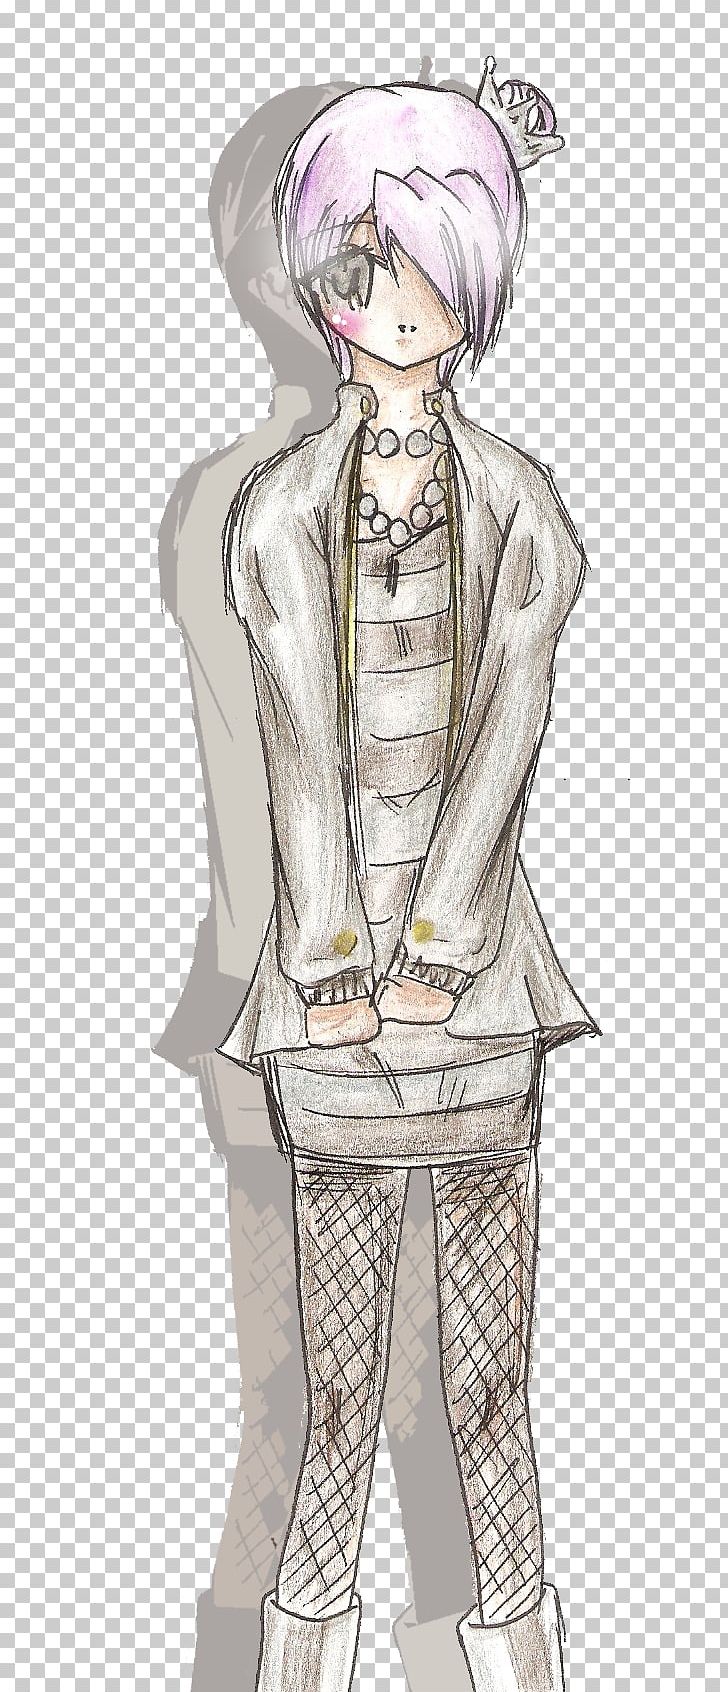 Clothing Drawing Fashion Design PNG, Clipart, Animals, Anime, Art, Cartoon, Clothing Free PNG Download